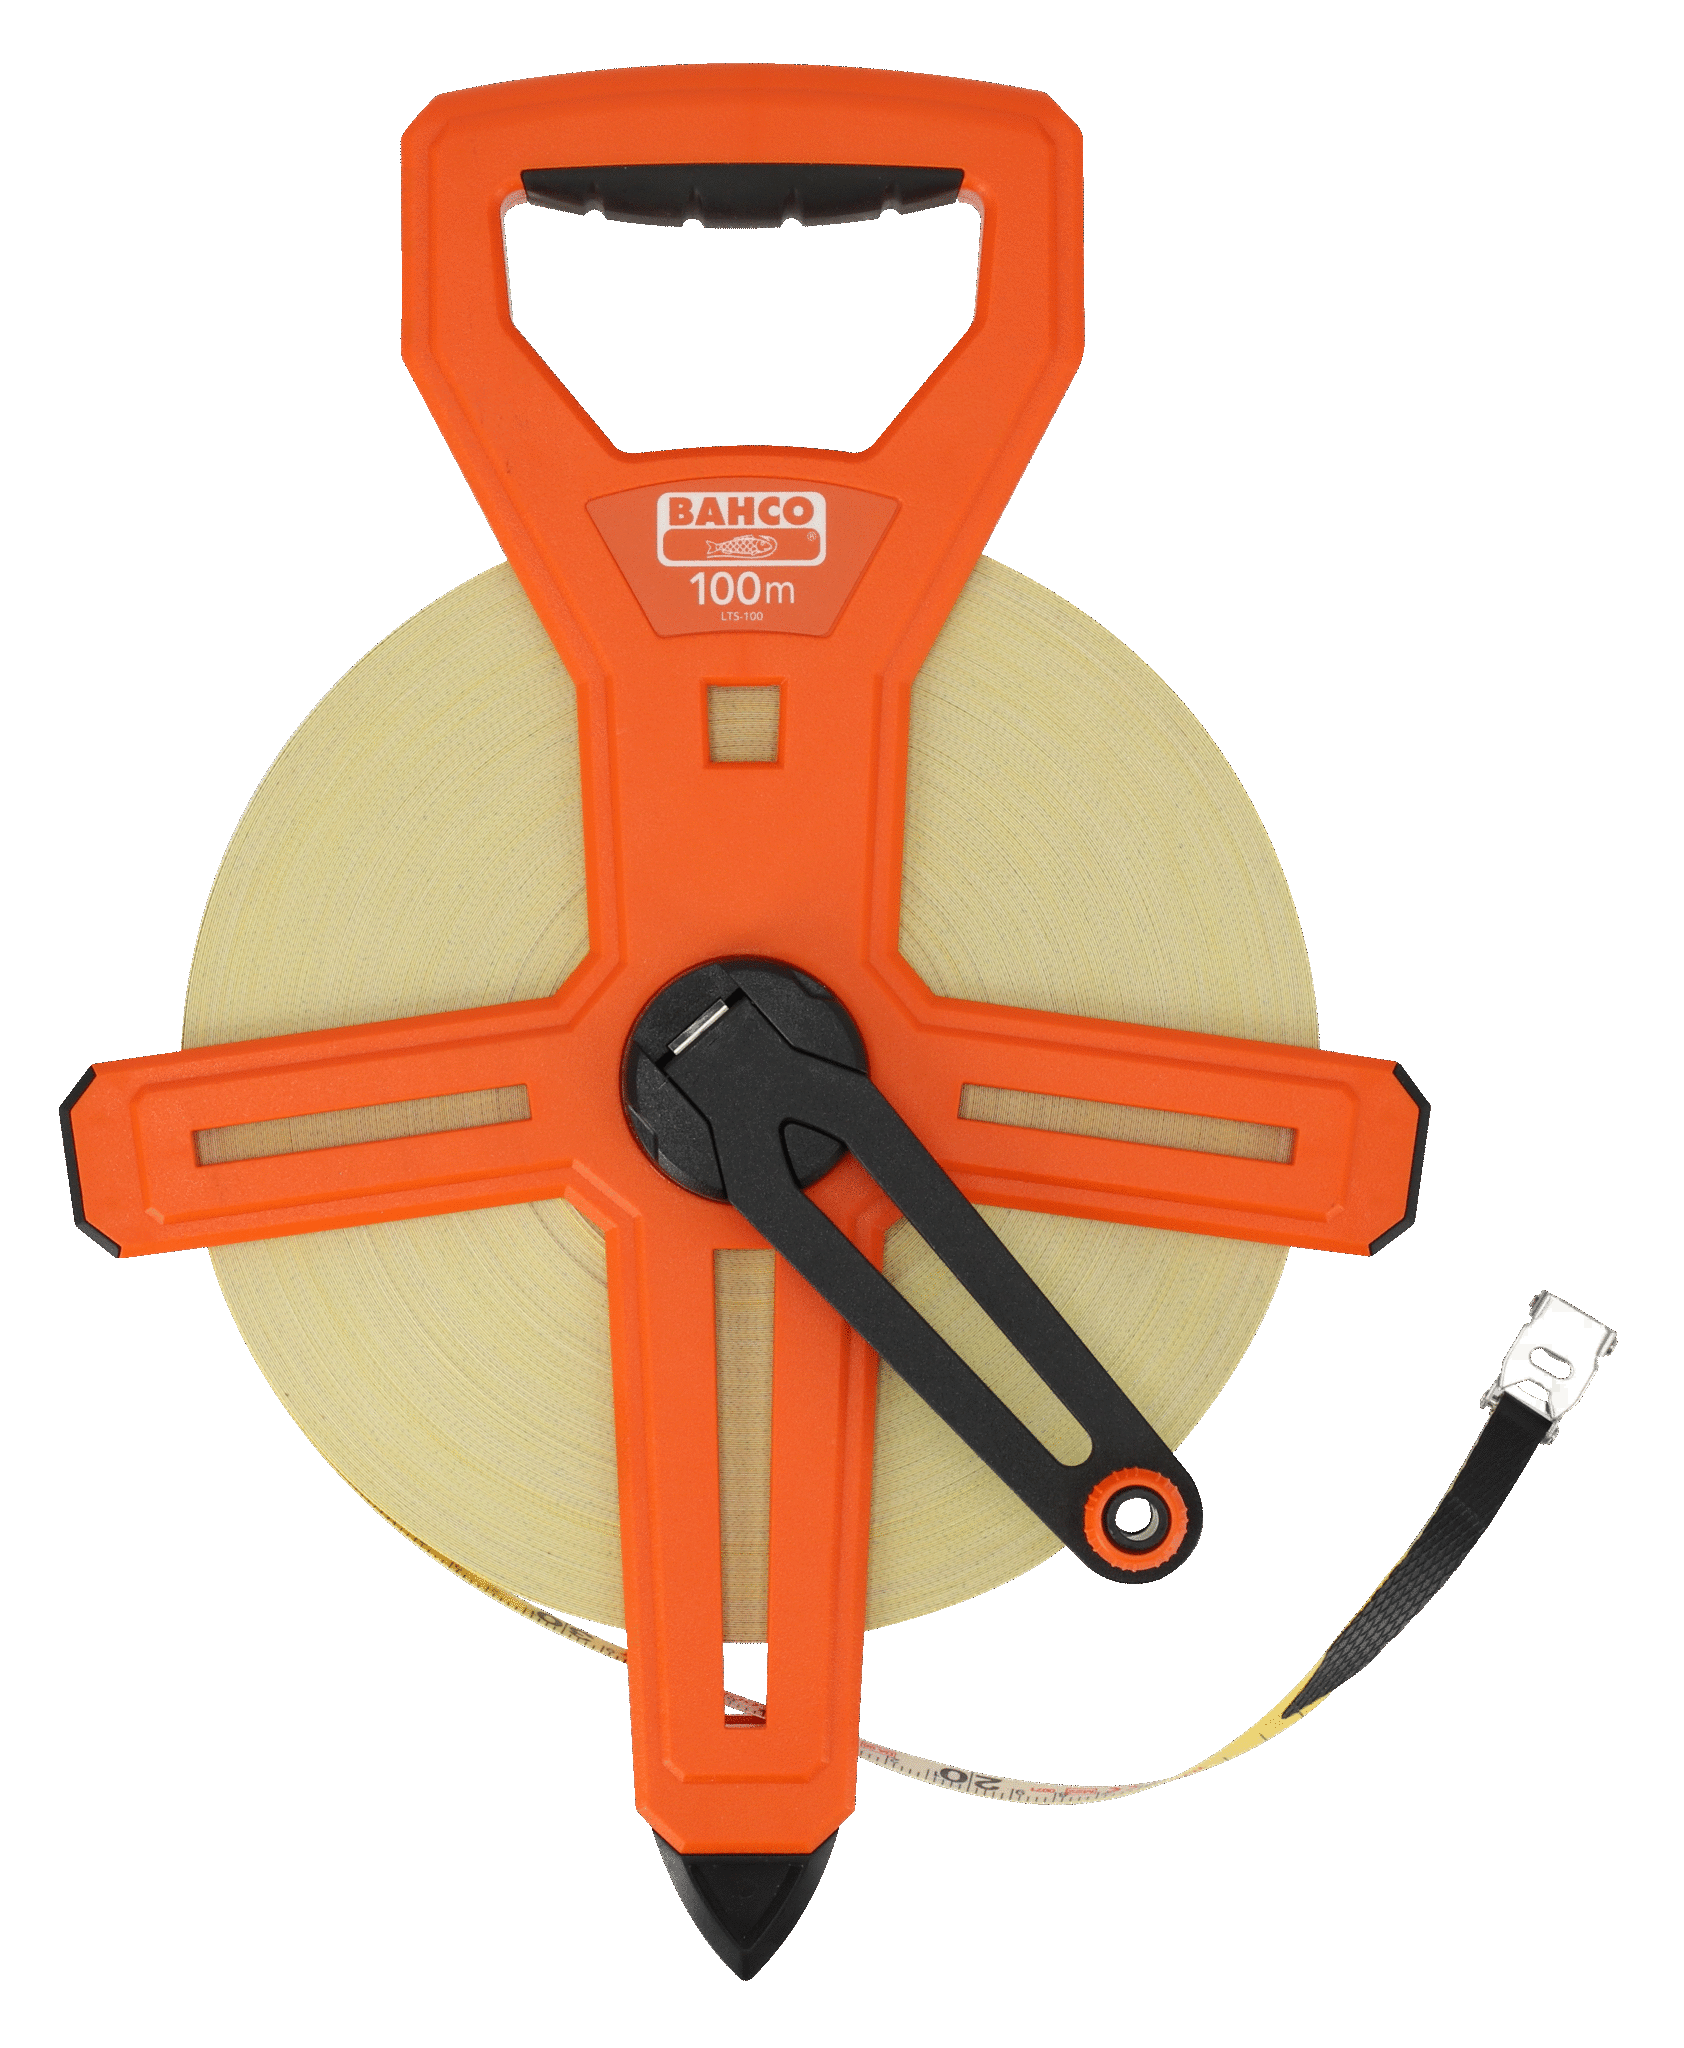 100m Open Long Reel Tape Measure LTS-100 by Bahco